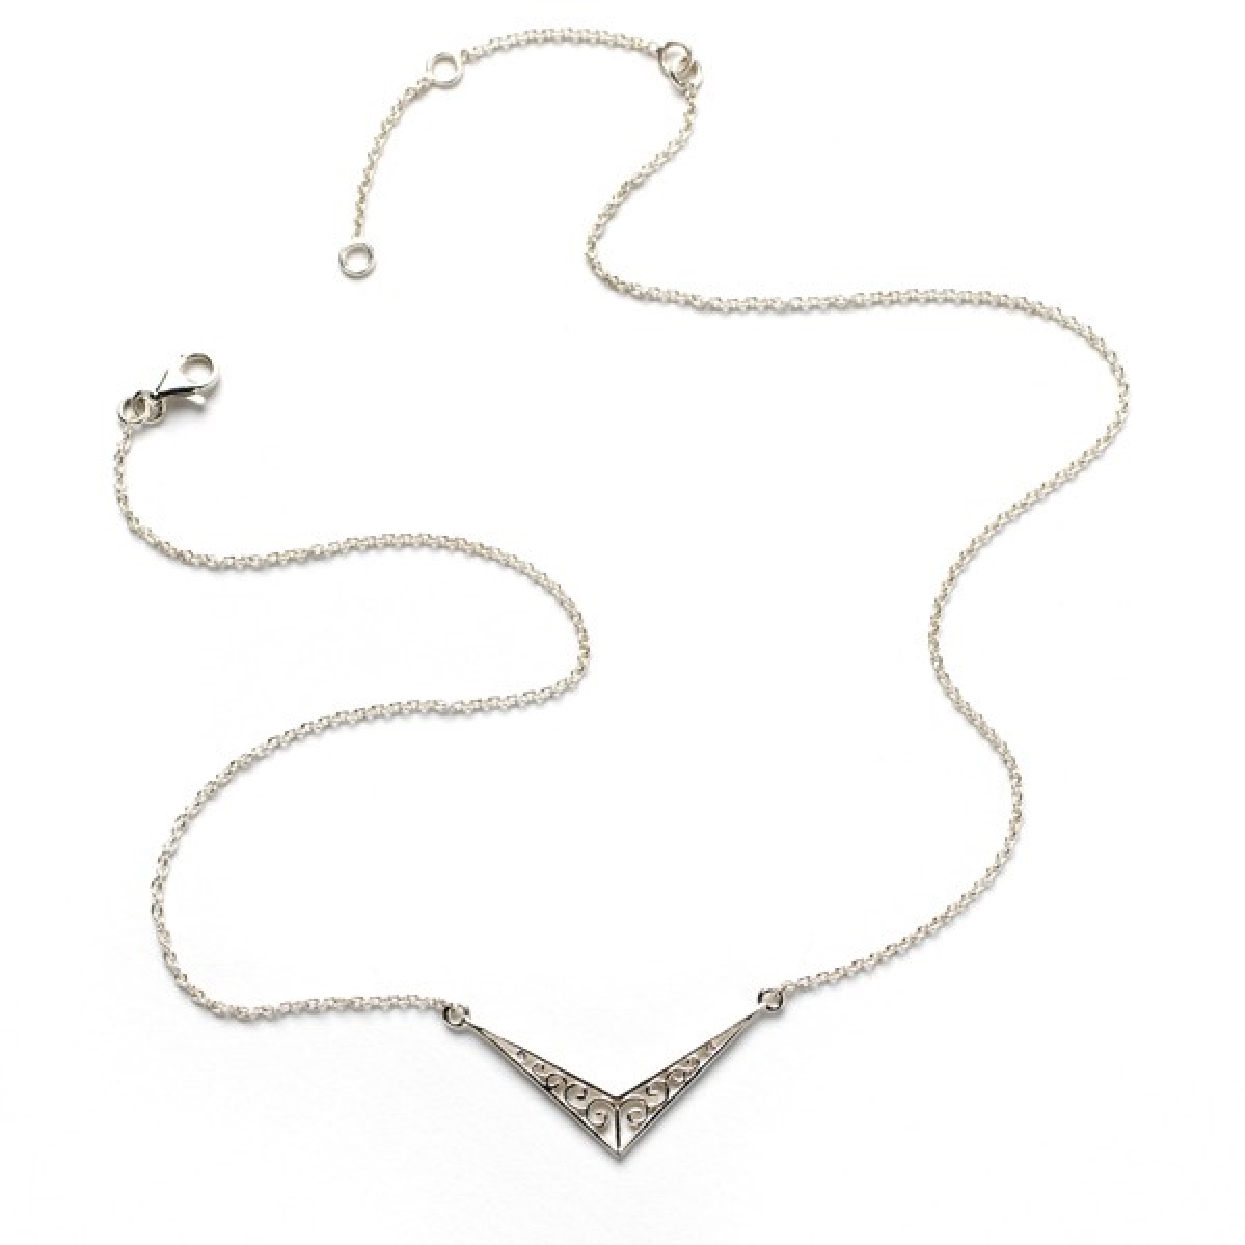 Southern Gates Sterling Silver Art Deco Chevron Station Necklace; 16-18 inches

C212